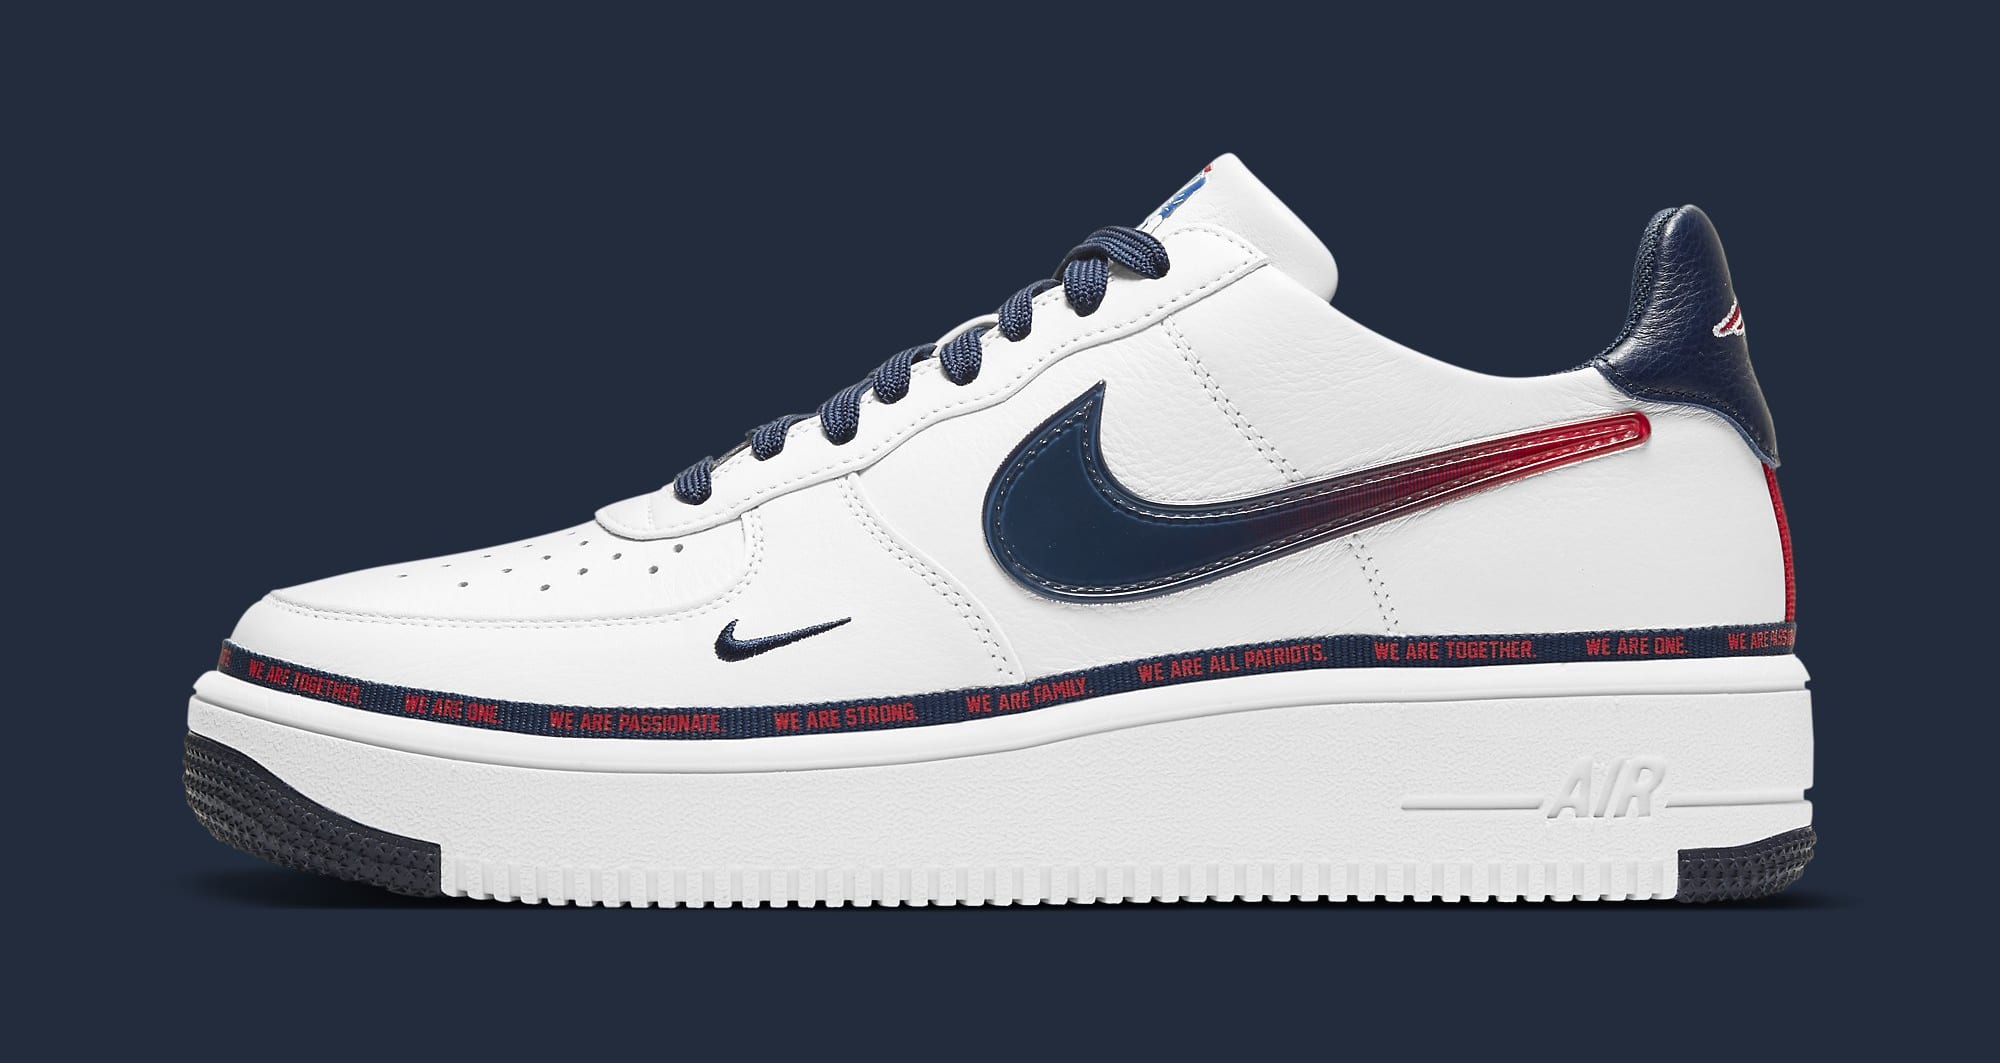 New England Patriots Colors Land On This Nike Air Force 1 High - Sneaker  News